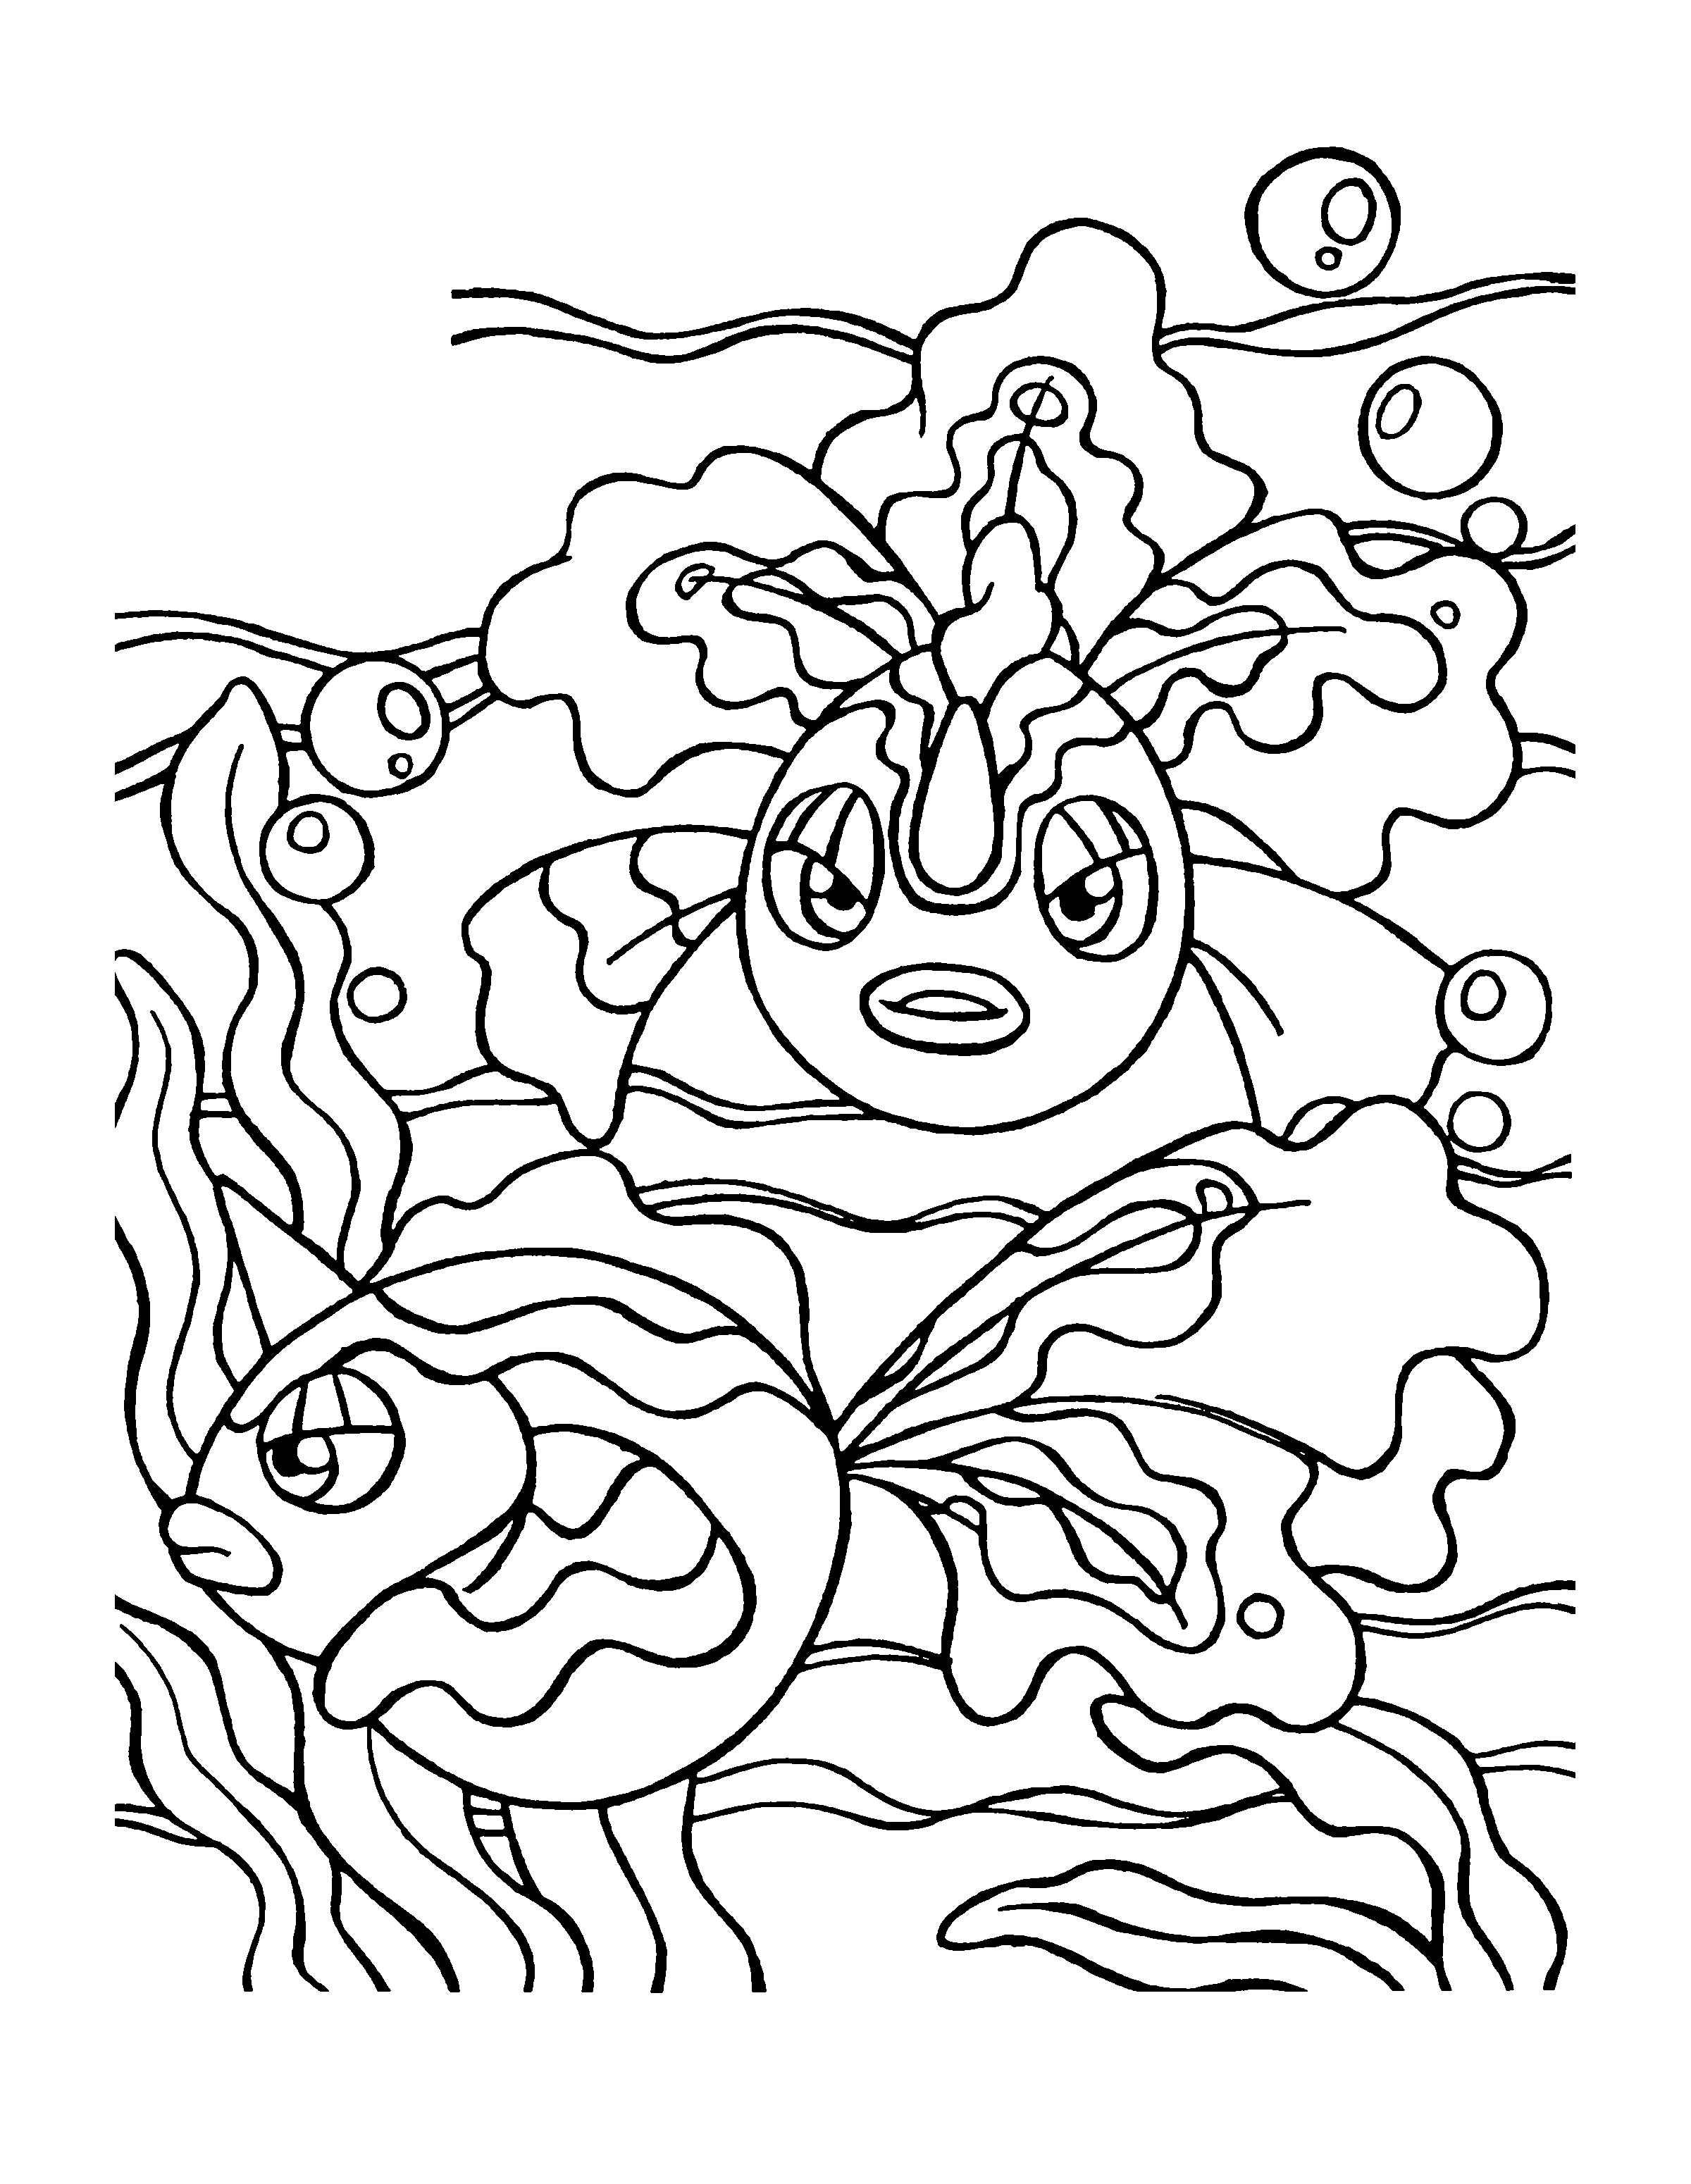 coloring-page-pokemon-coloring-pages-206